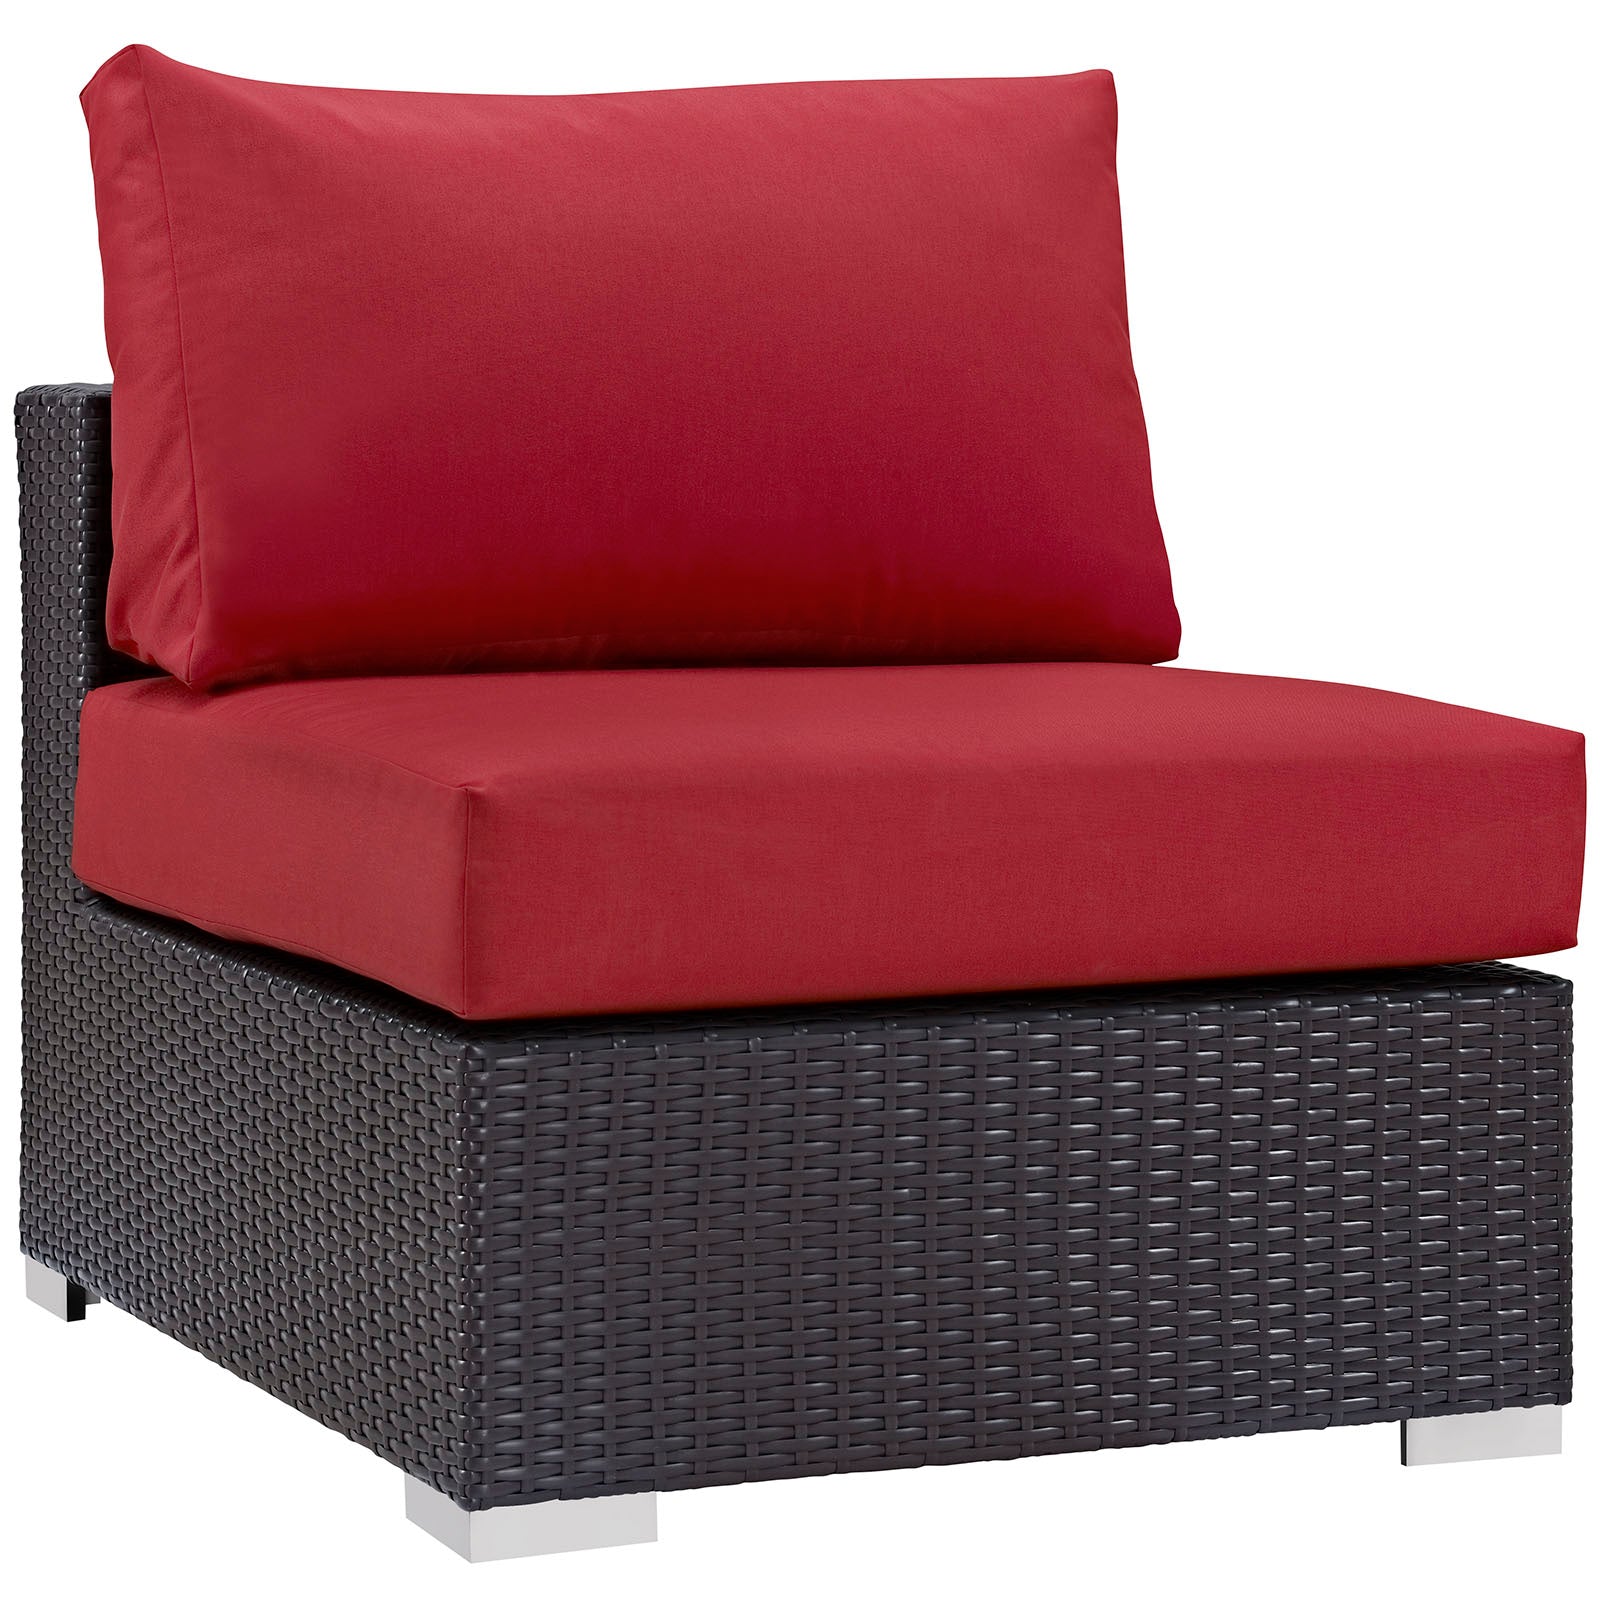 Modway Outdoor Chairs - Convene Outdoor Patio Armless Chair Espresso & Red